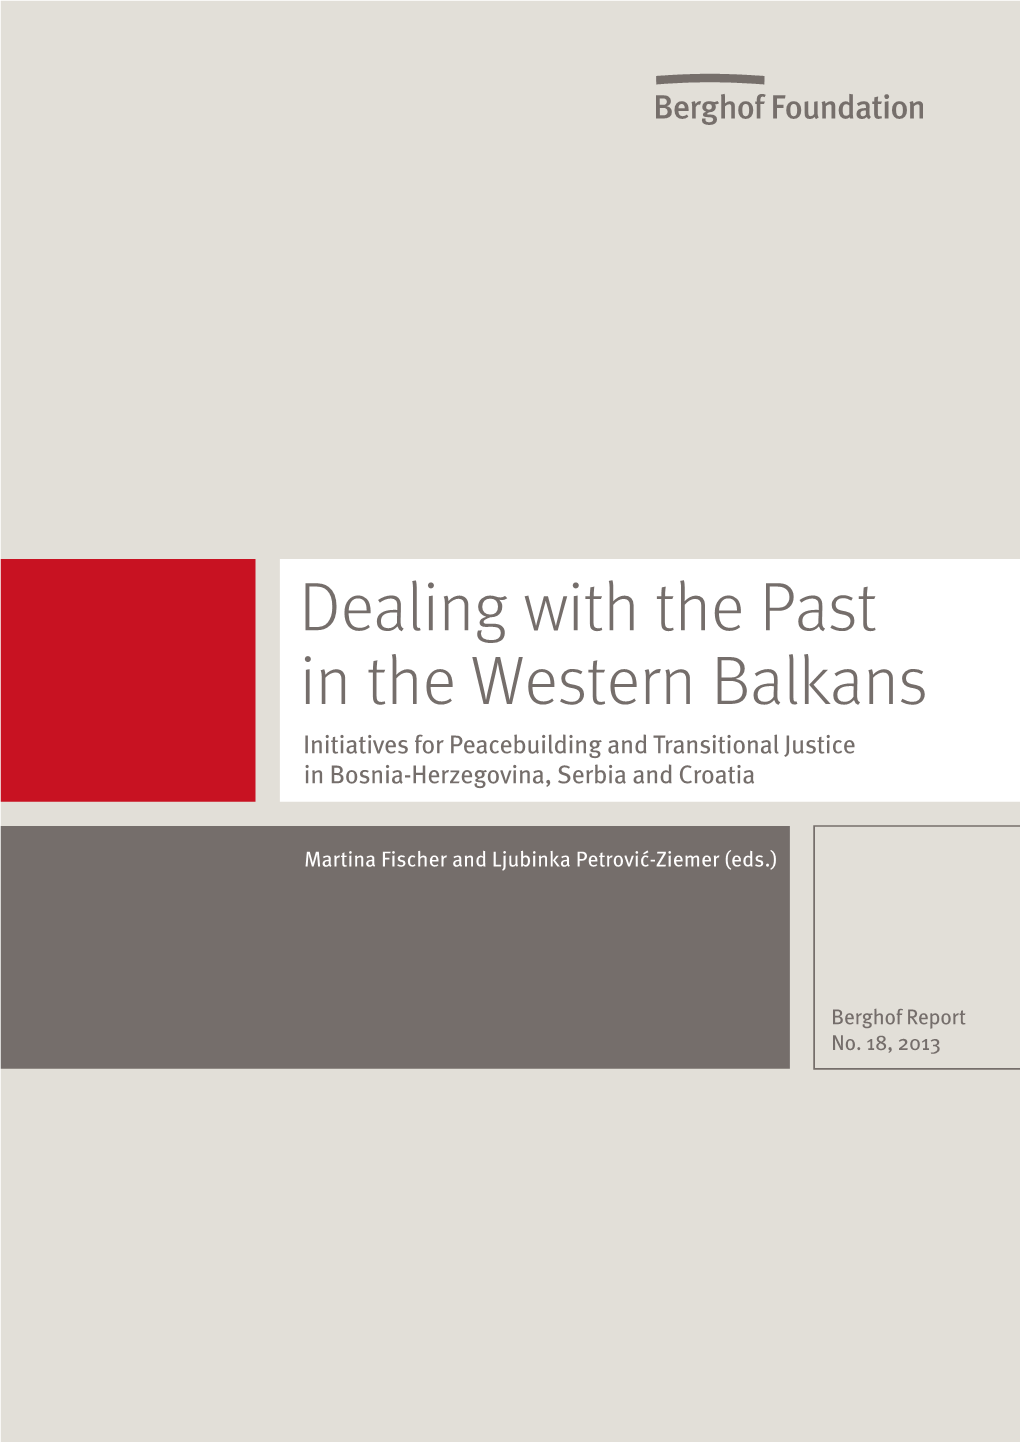 Dealing with the Past in the Western Balkans Initiatives for Peacebuilding and Transitional Justice in Bosnia-Herzegovina, Serbia and Croatia